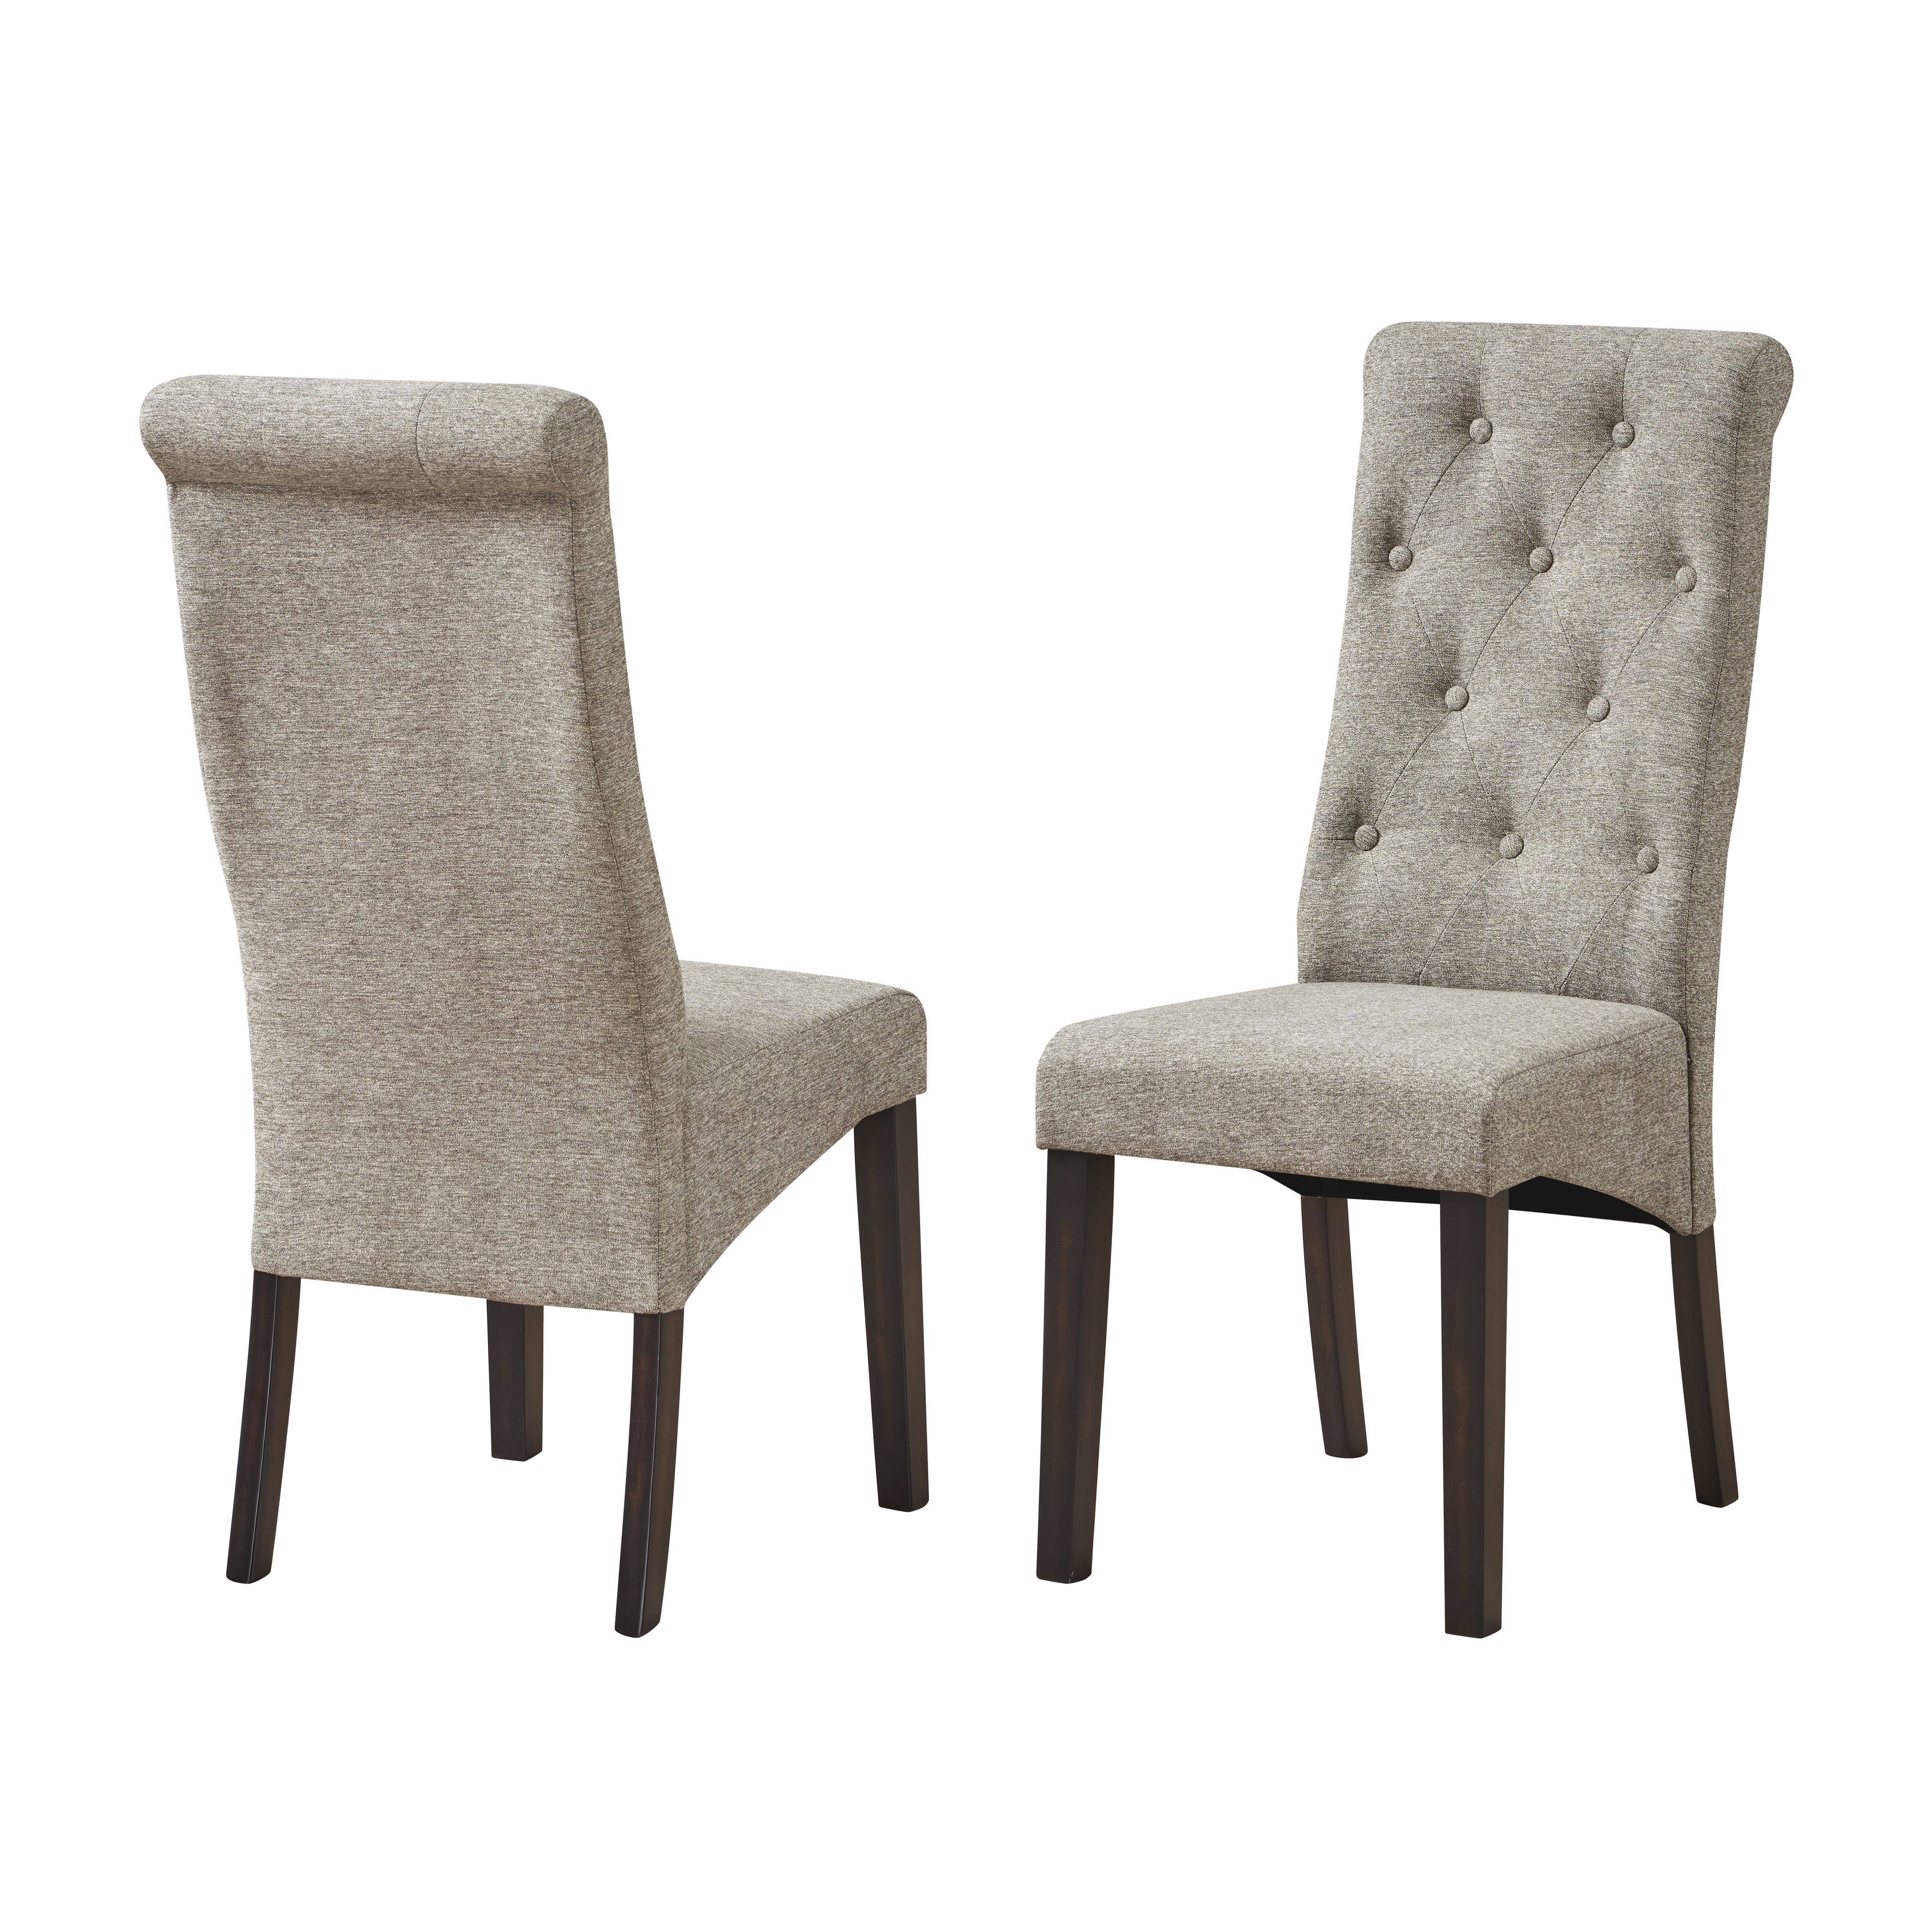 Huxley Parsons Dining Side Chairs Gray, Catherine Parsons Dining Chair